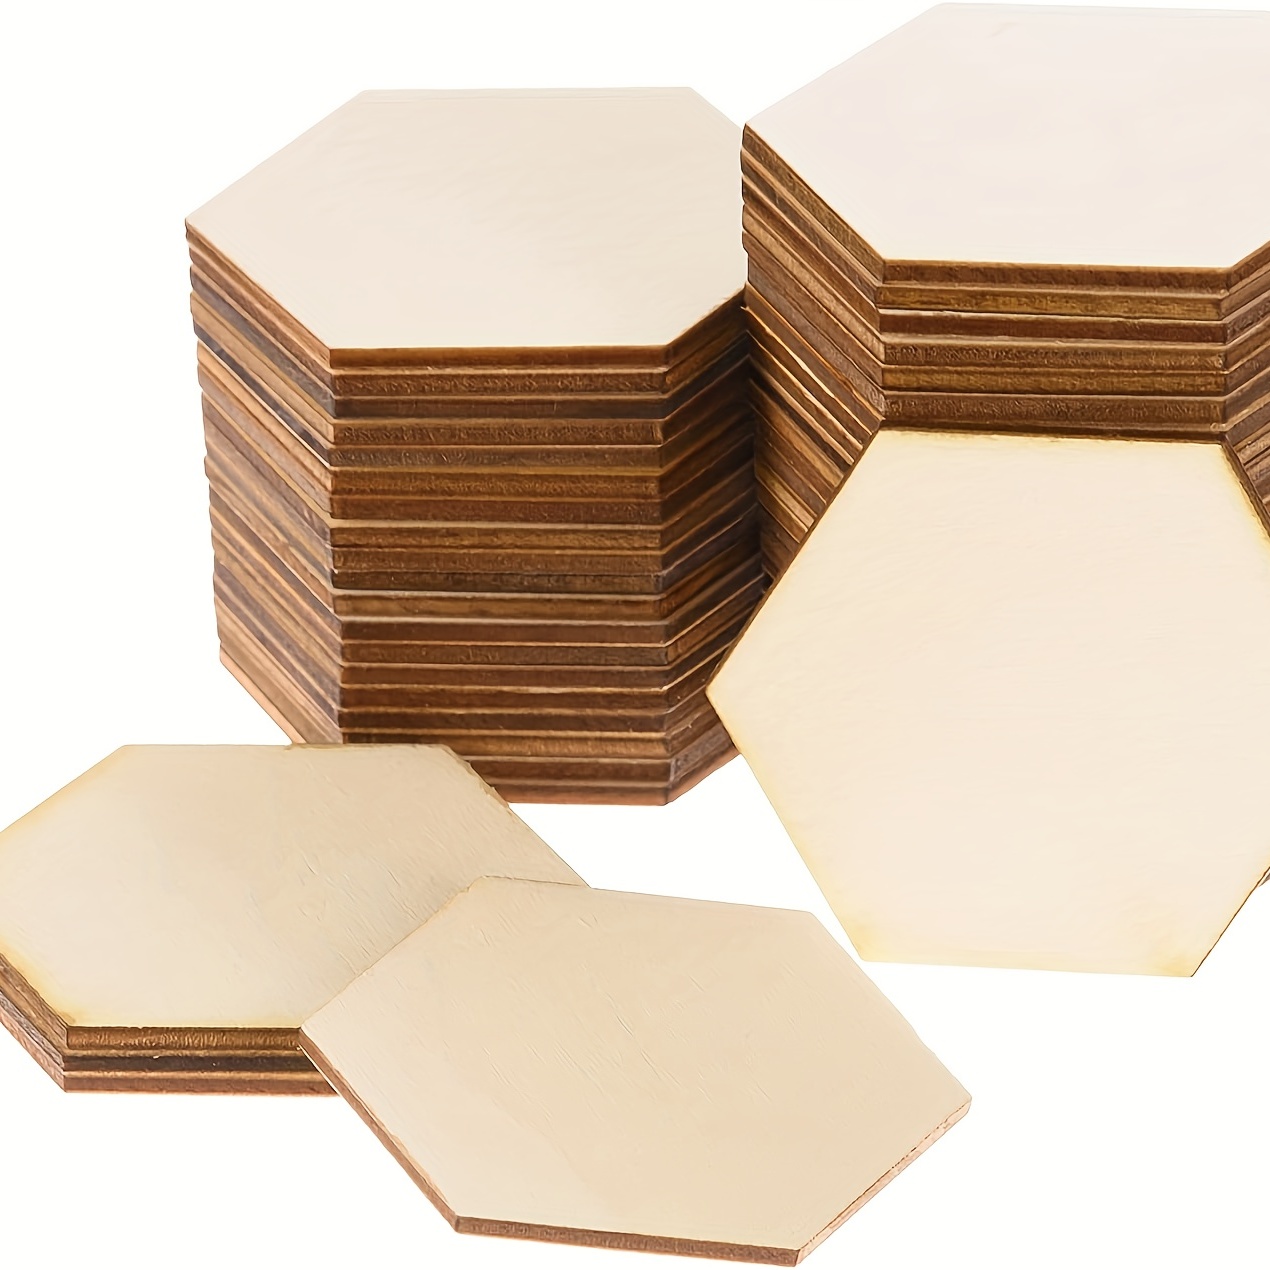 EXCEART 25Pcs 9MM Hexagon Wood Shapes Unfinished Wooden Cutout Pieces  Hexagon Wooden Slices DIY Craft Project Gift Tags Ornaments (9 CM)